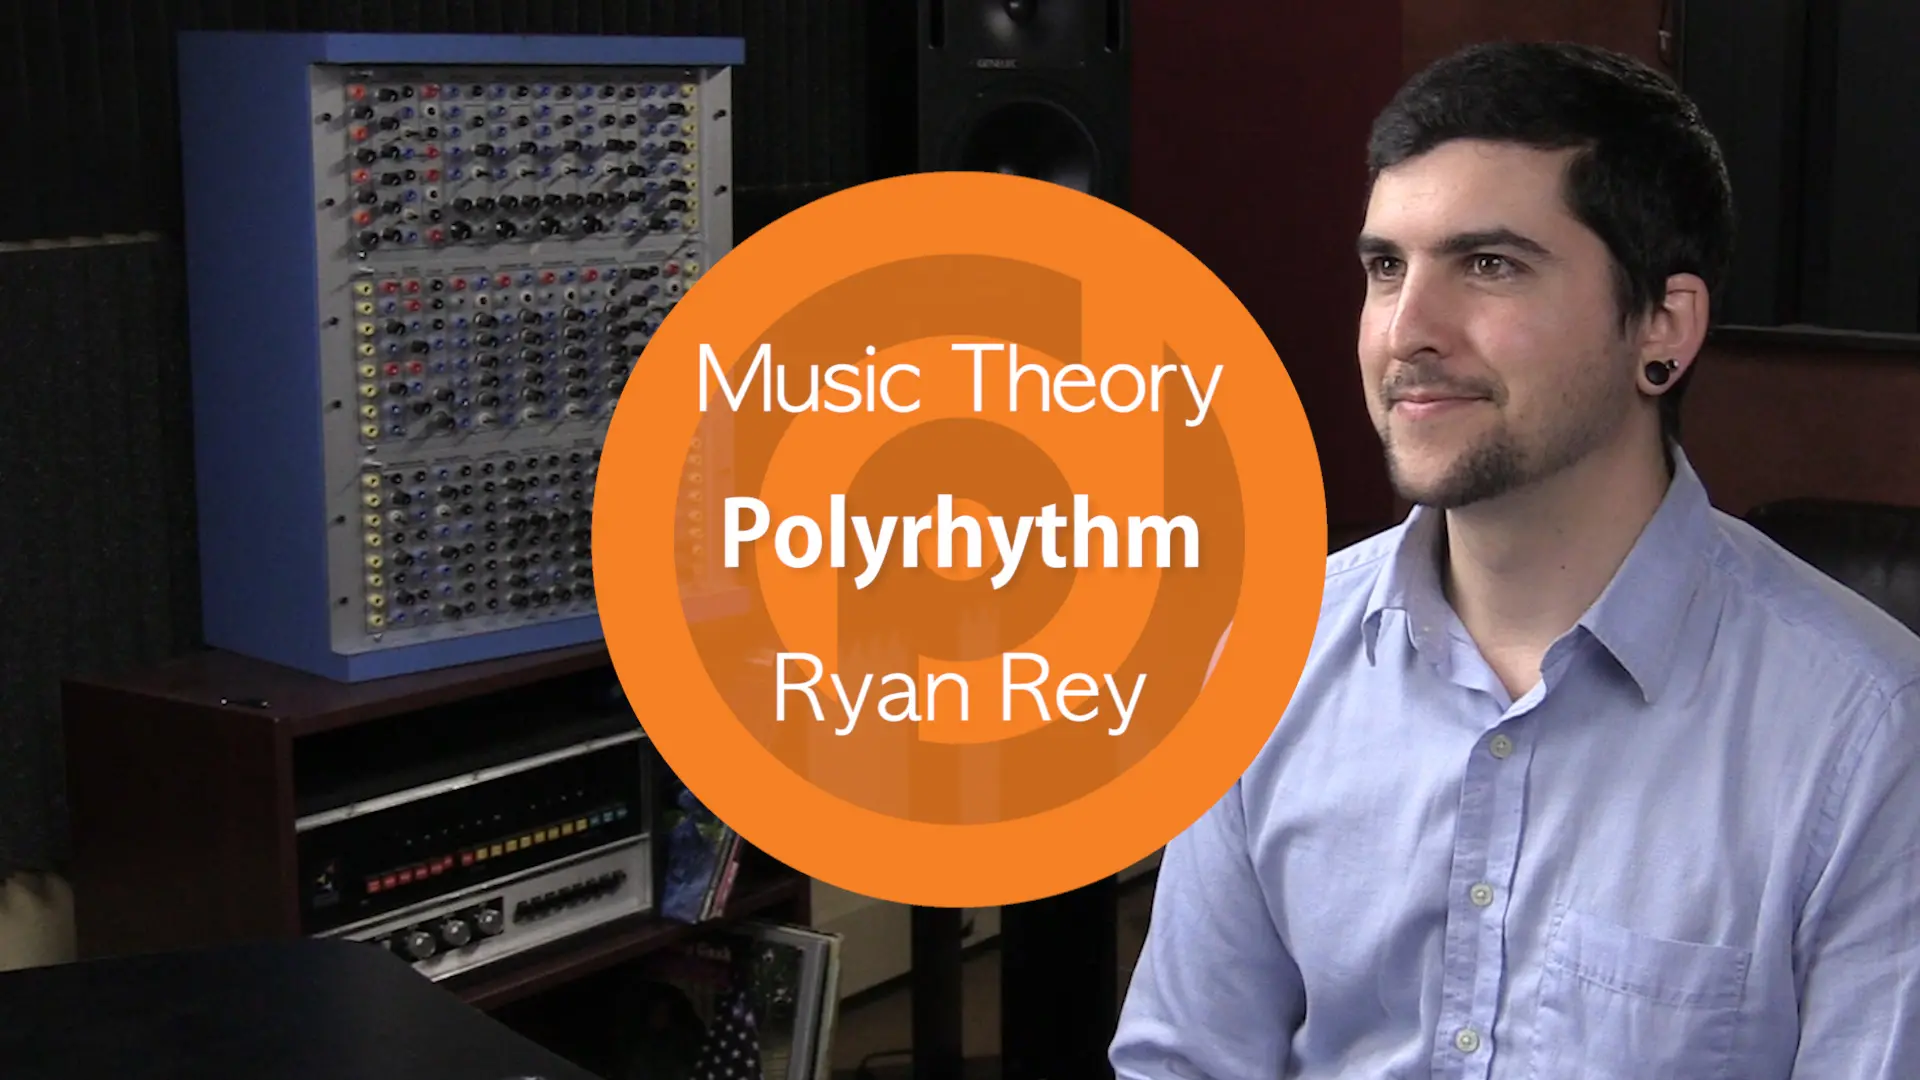 Ryan Rey, a music producer and expert in music theory, uses polyrhythms to create unique and captivating sounds. With his extensive knowledge of mixing and mastering techniques, he masters the art